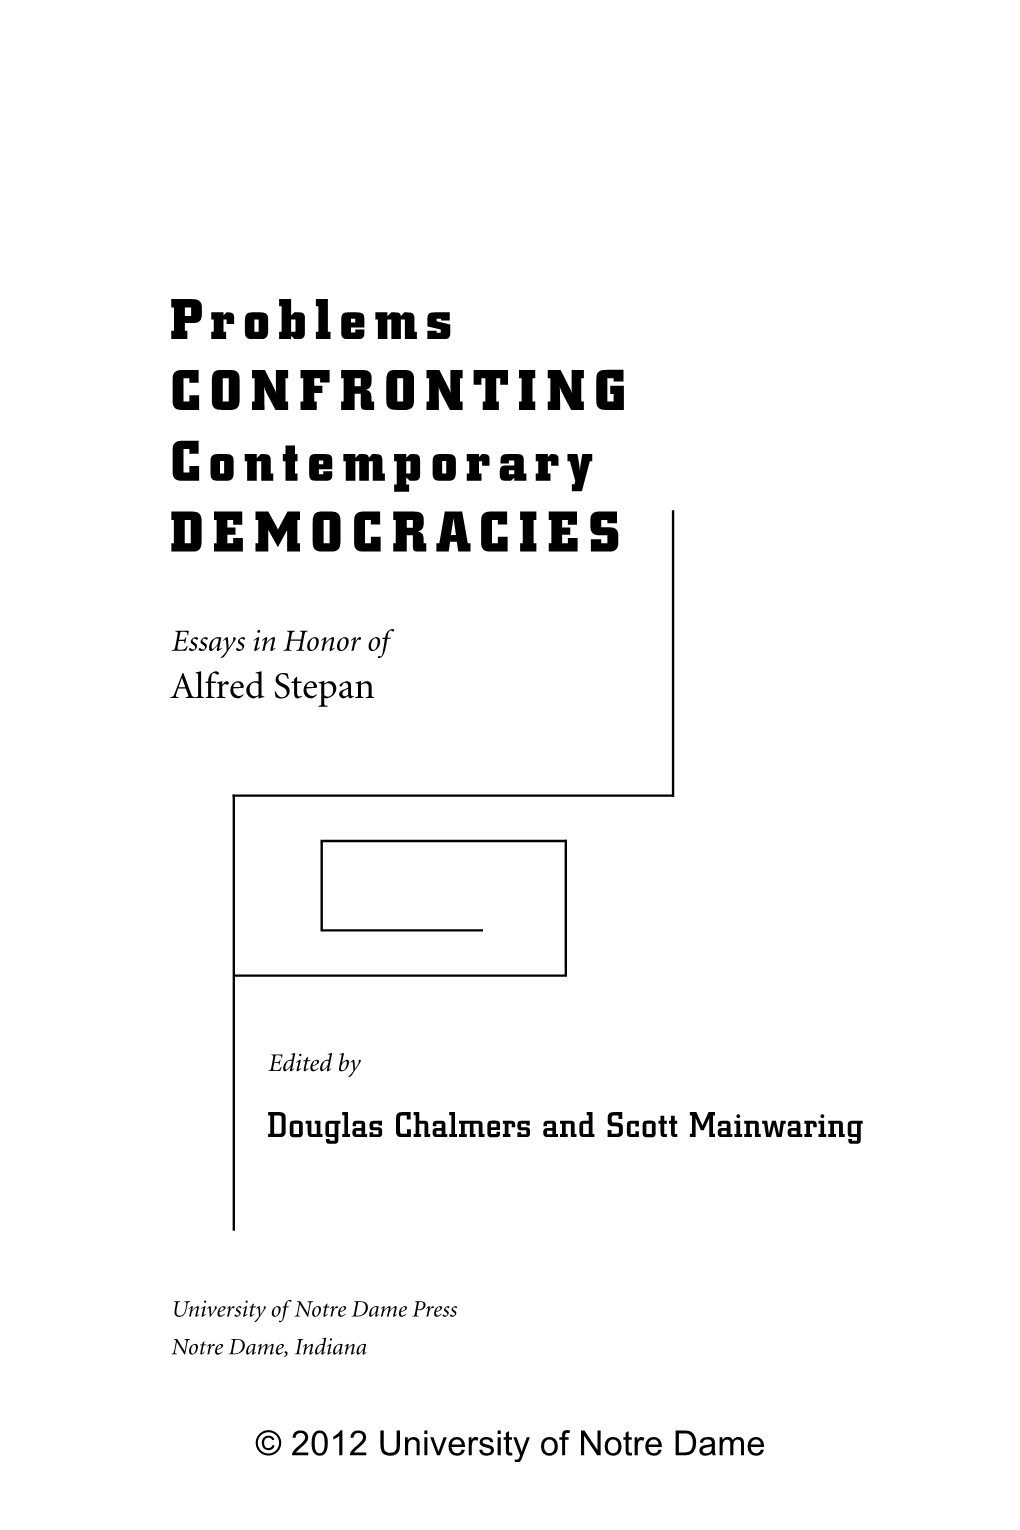 Problems Confronting Contemporary Democracies : Essays in Honor of Alfred Stepan / Edited by Douglas Chalmers and Scott Mainwaring